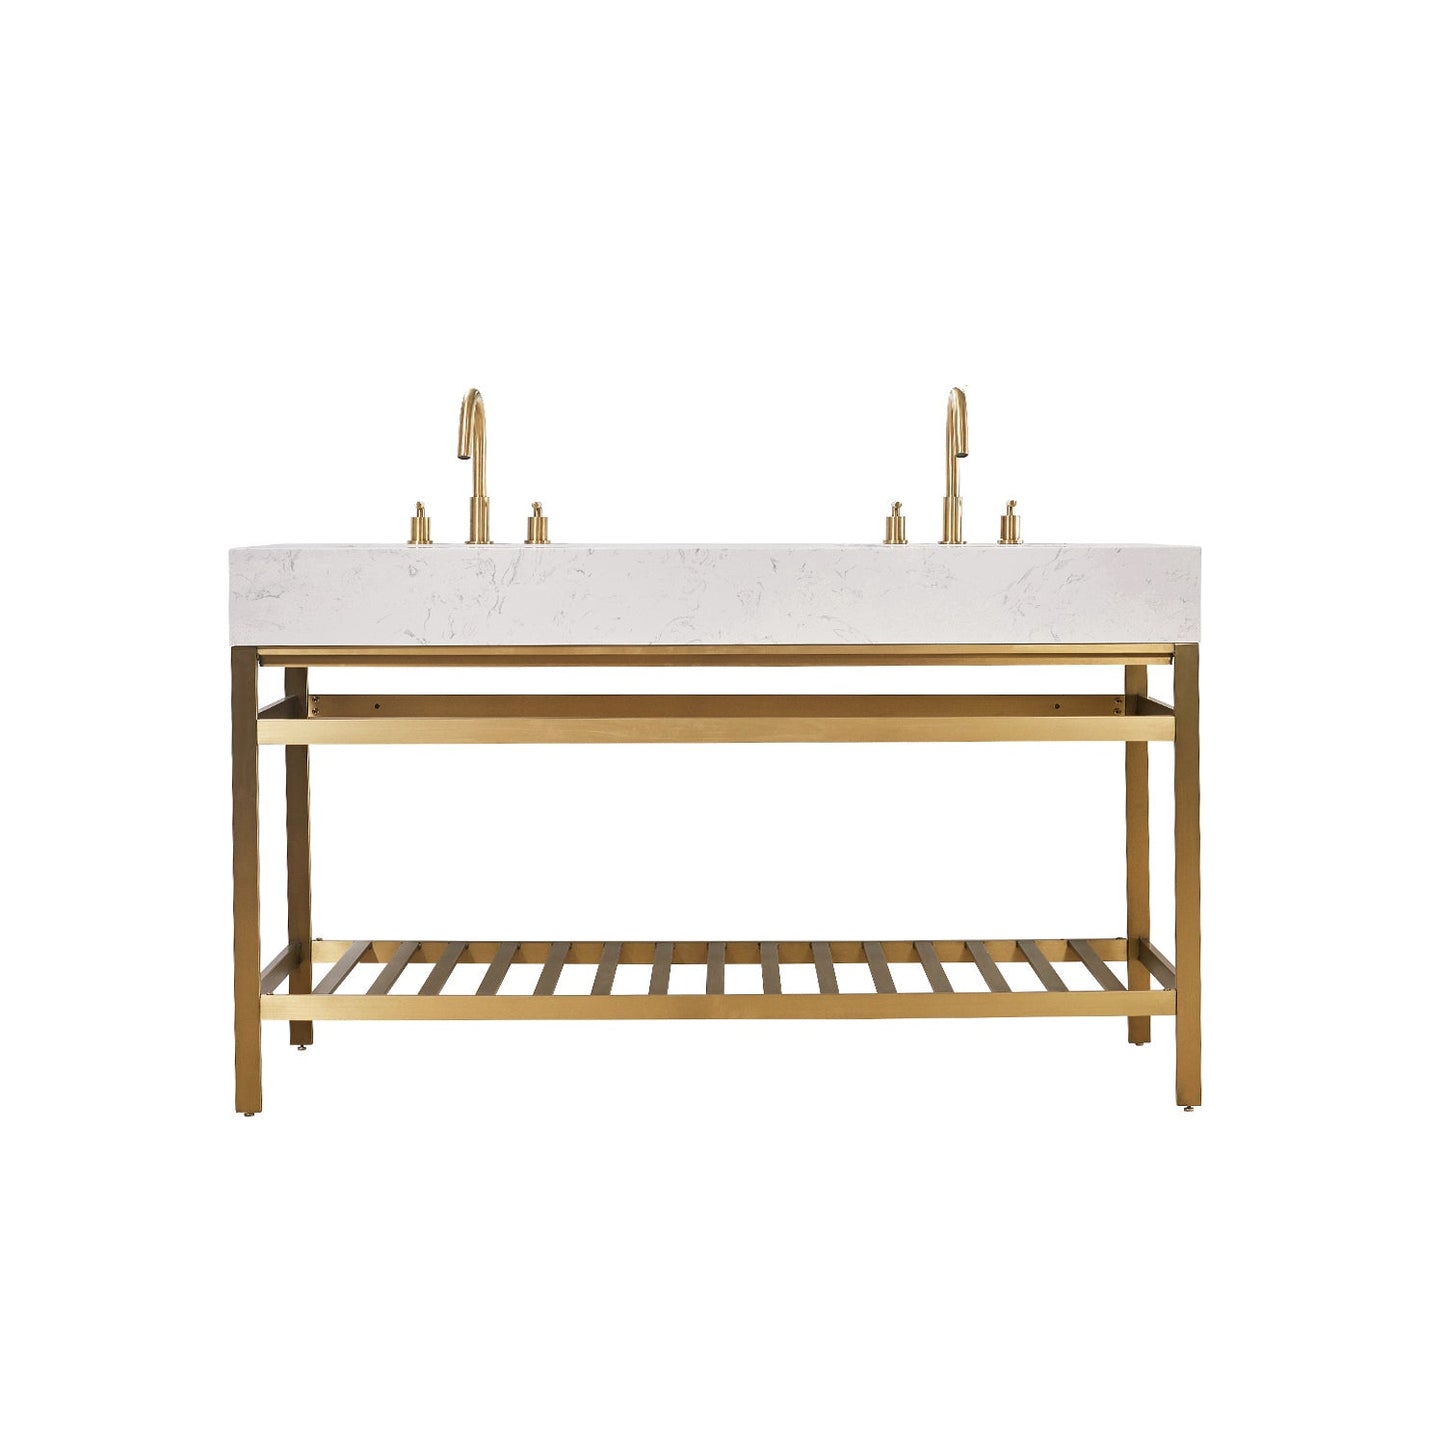 Merano 60" Double Stainless Steel Vanity Console in Brushed Gold with Aosta White Stone Countertop without Mirror